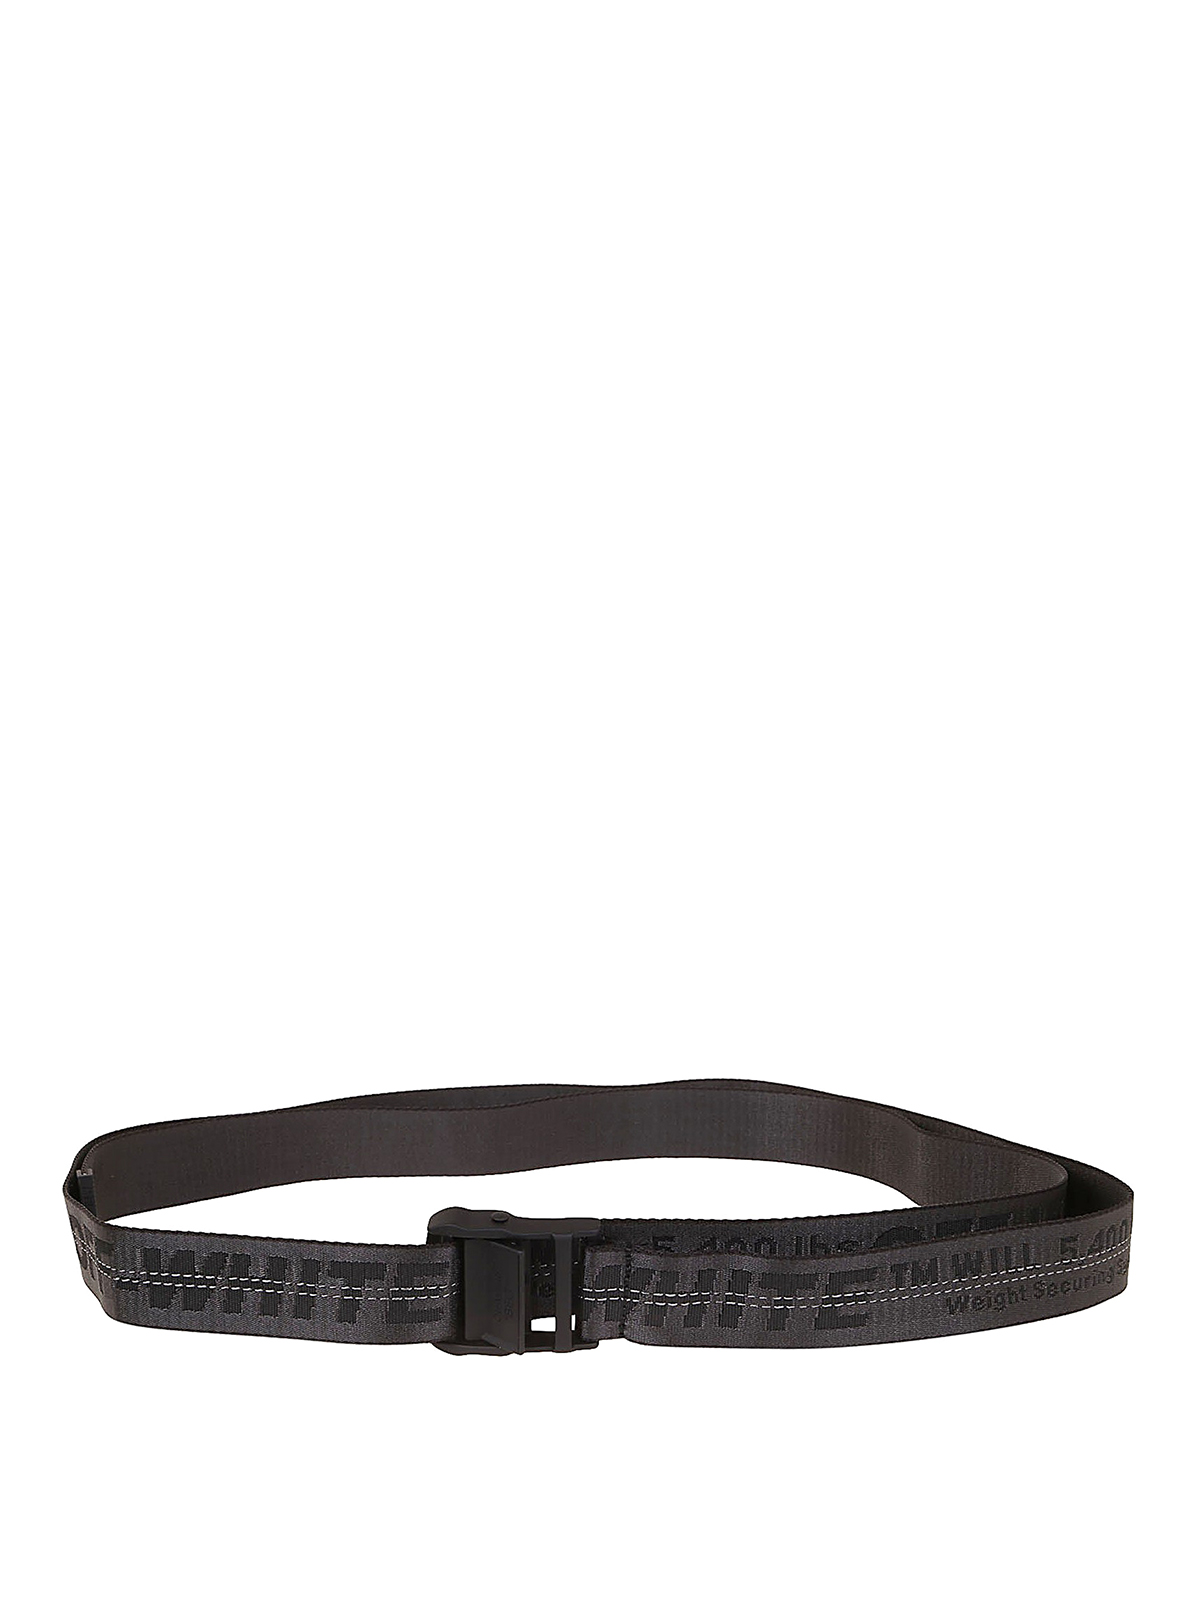 Off-White - Classic Industrial belt - belts - OWRB009R202230751010